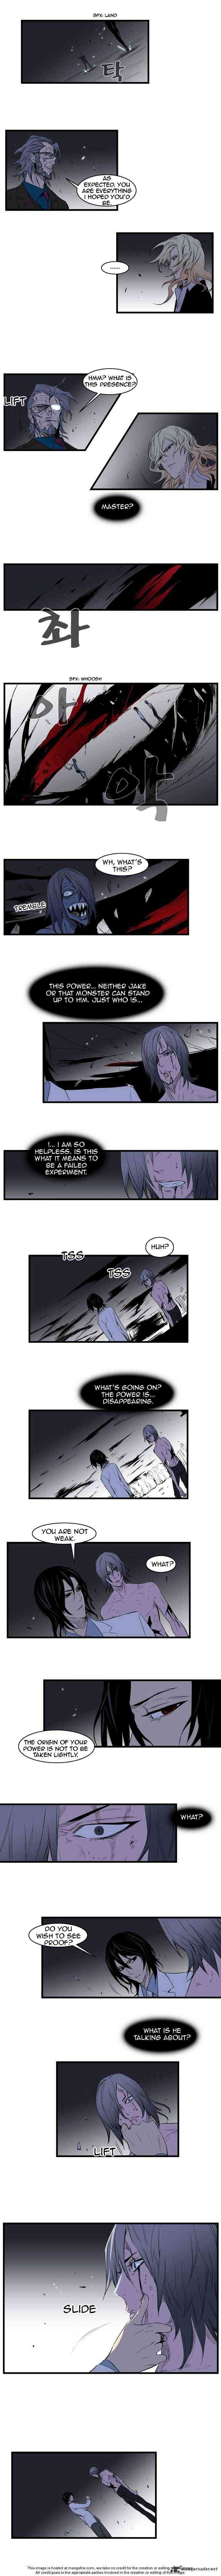 Noblesse Chapter 76 _ Chapters 76-90 page 84